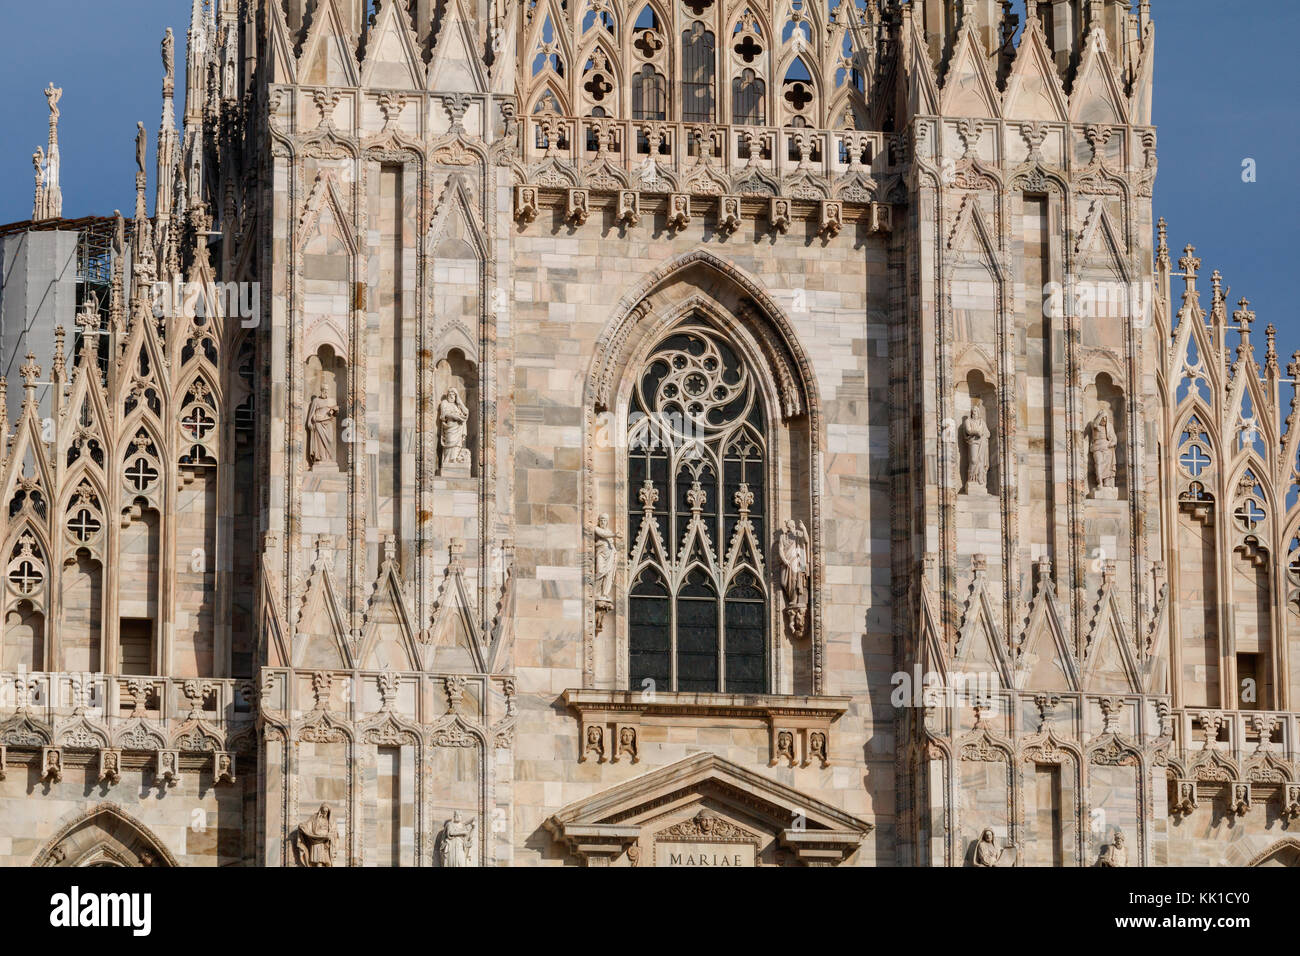 View of architectural details on the massive gothic cathedral Duomo, Milan, Italy Stock Photo